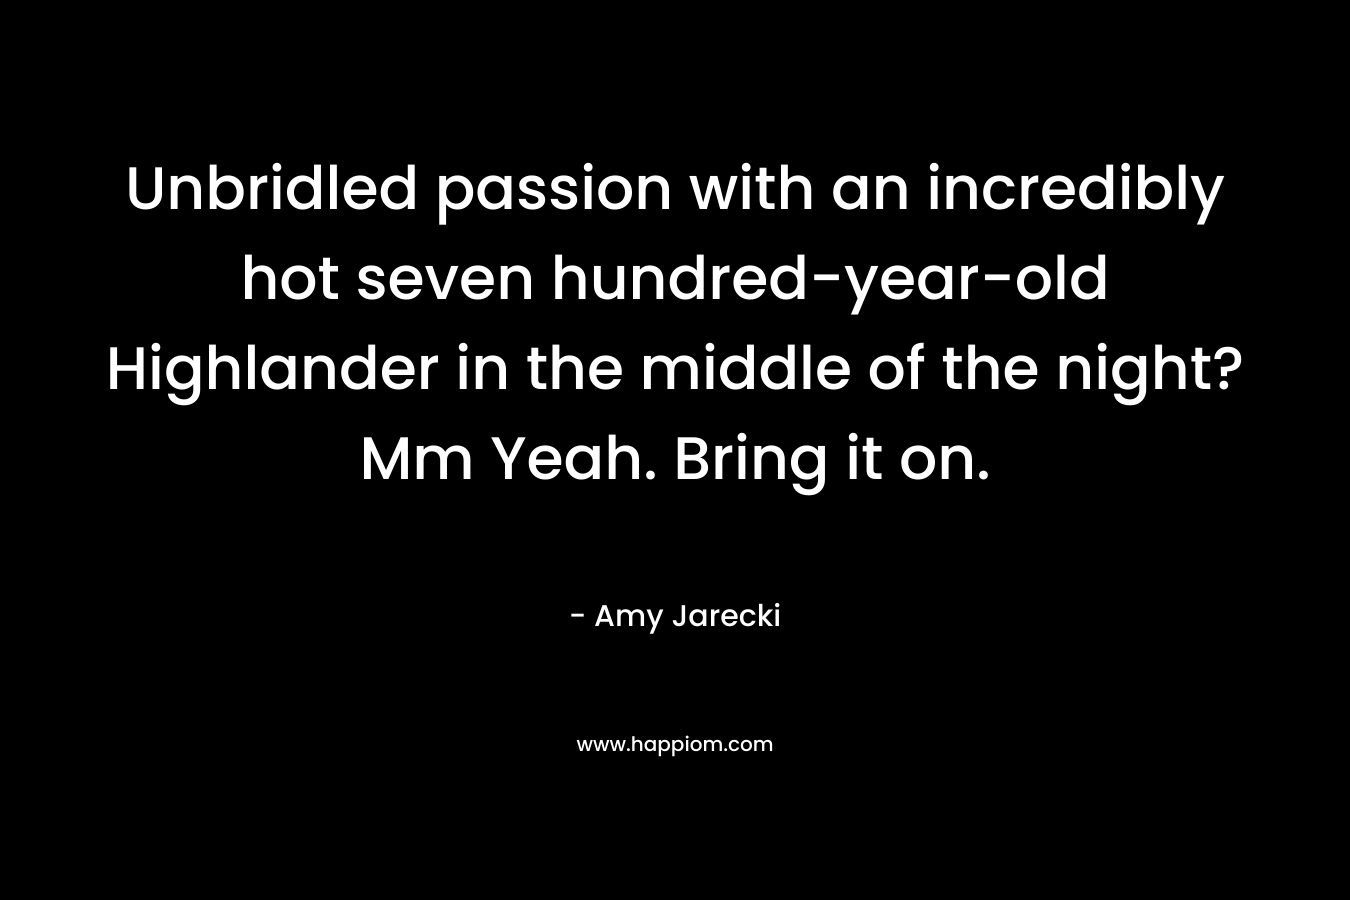 Unbridled passion with an incredibly hot seven hundred-year-old Highlander in the middle of the night? Mm Yeah. Bring it on. – Amy Jarecki